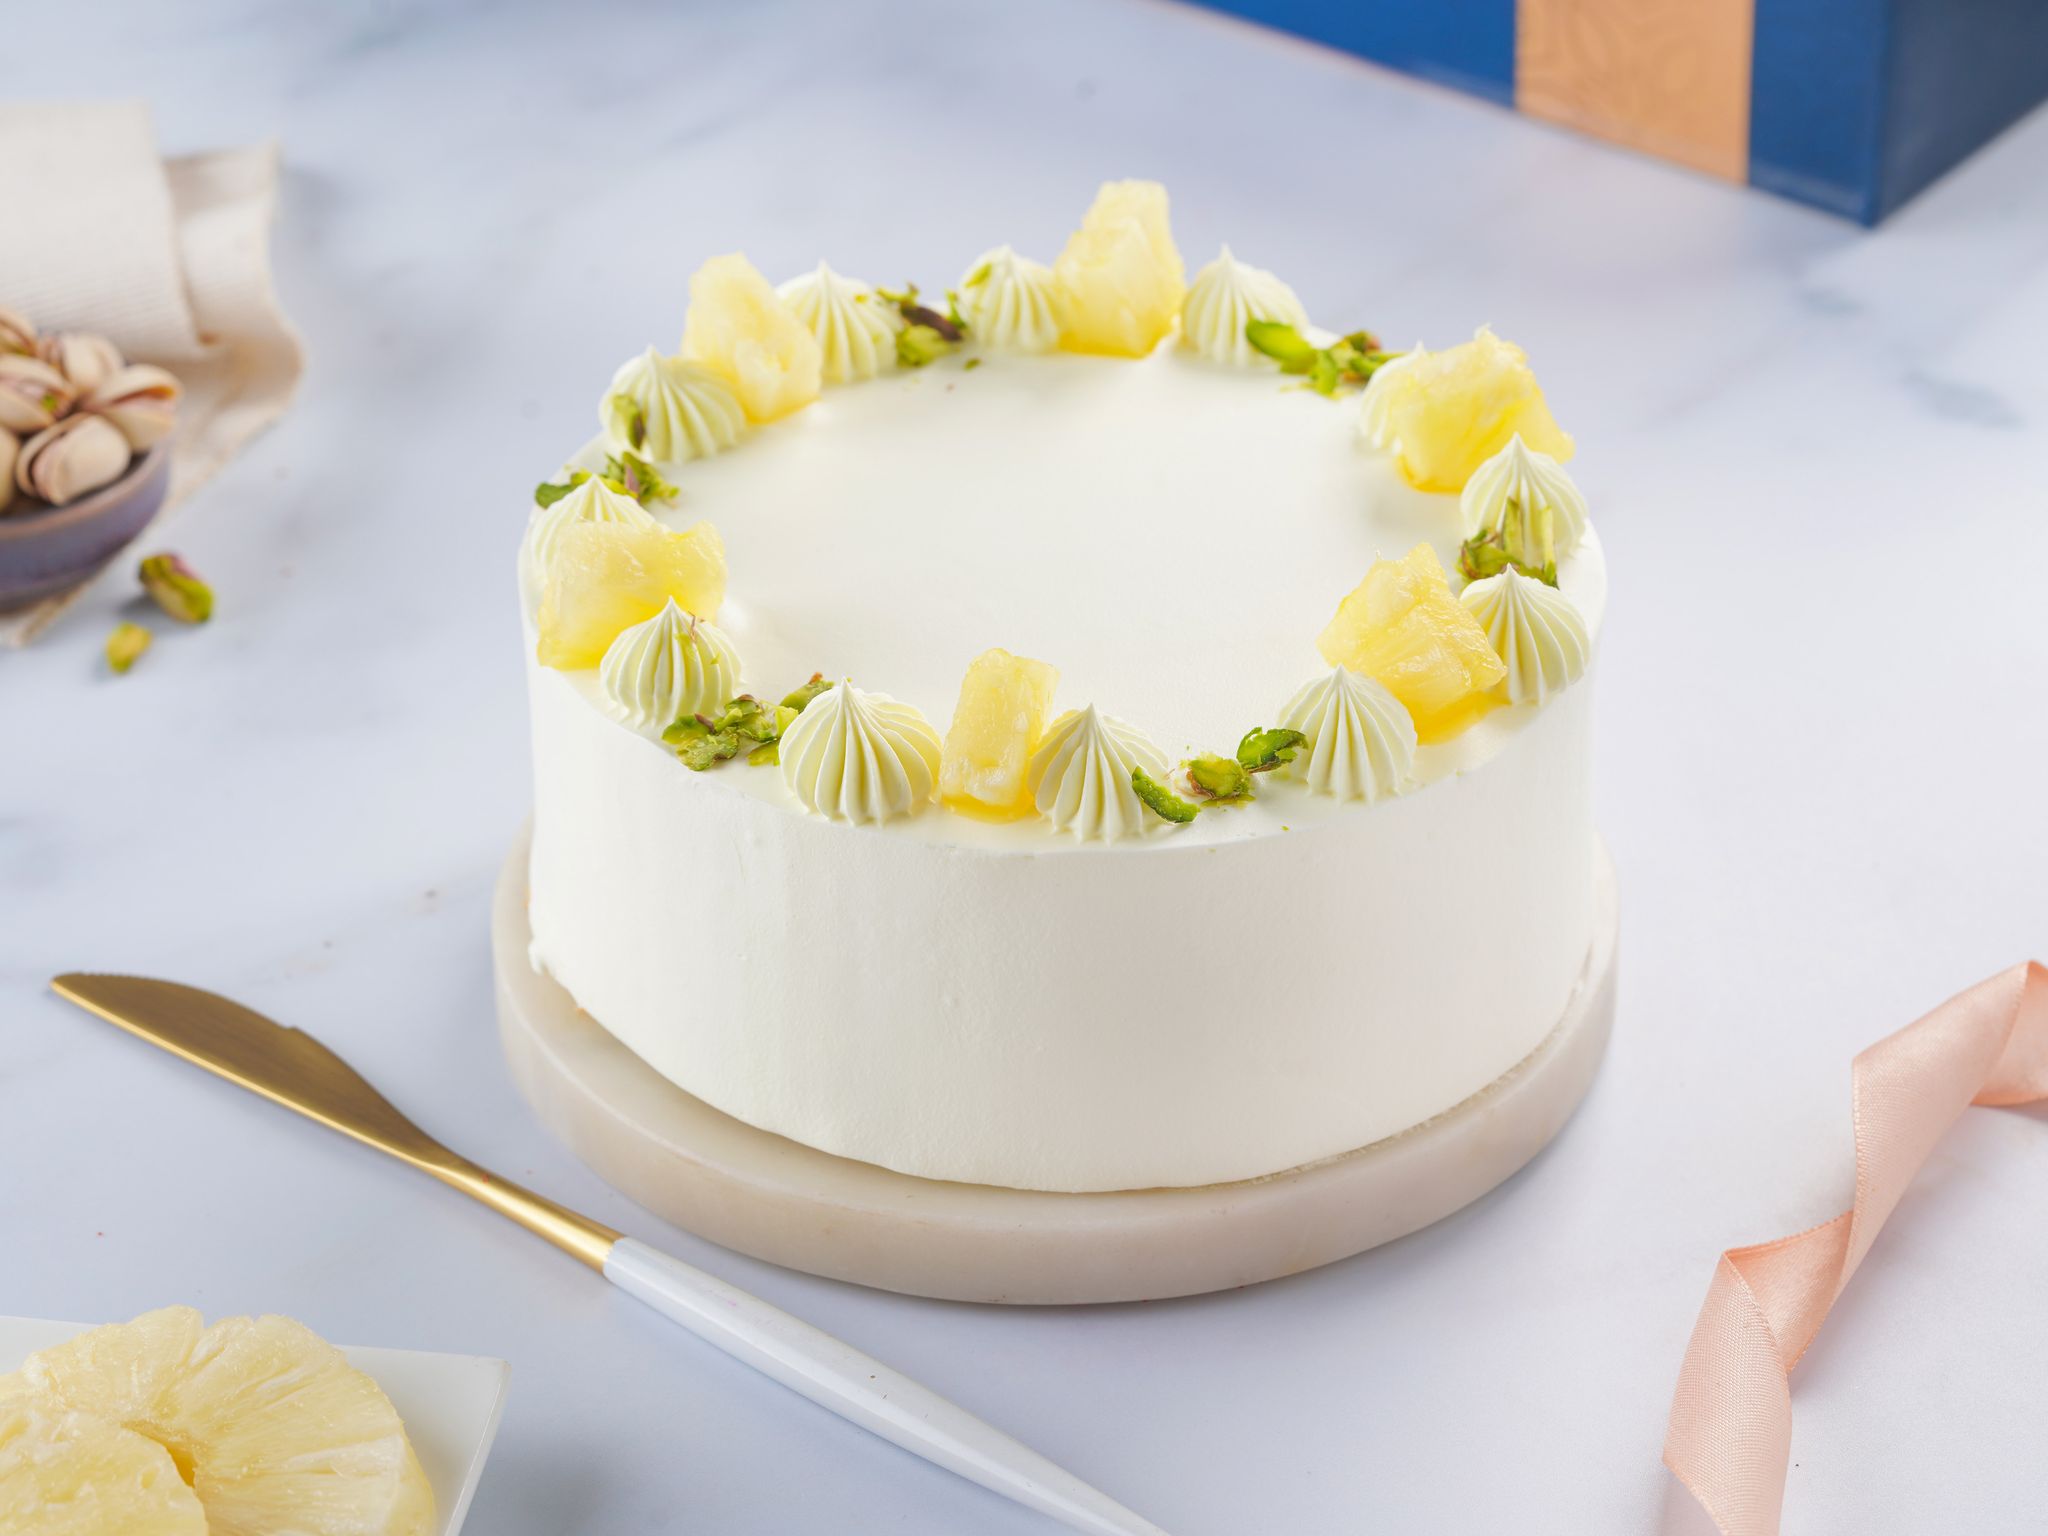 Details more than 78 pineapple cake online delivery latest -  awesomeenglish.edu.vn